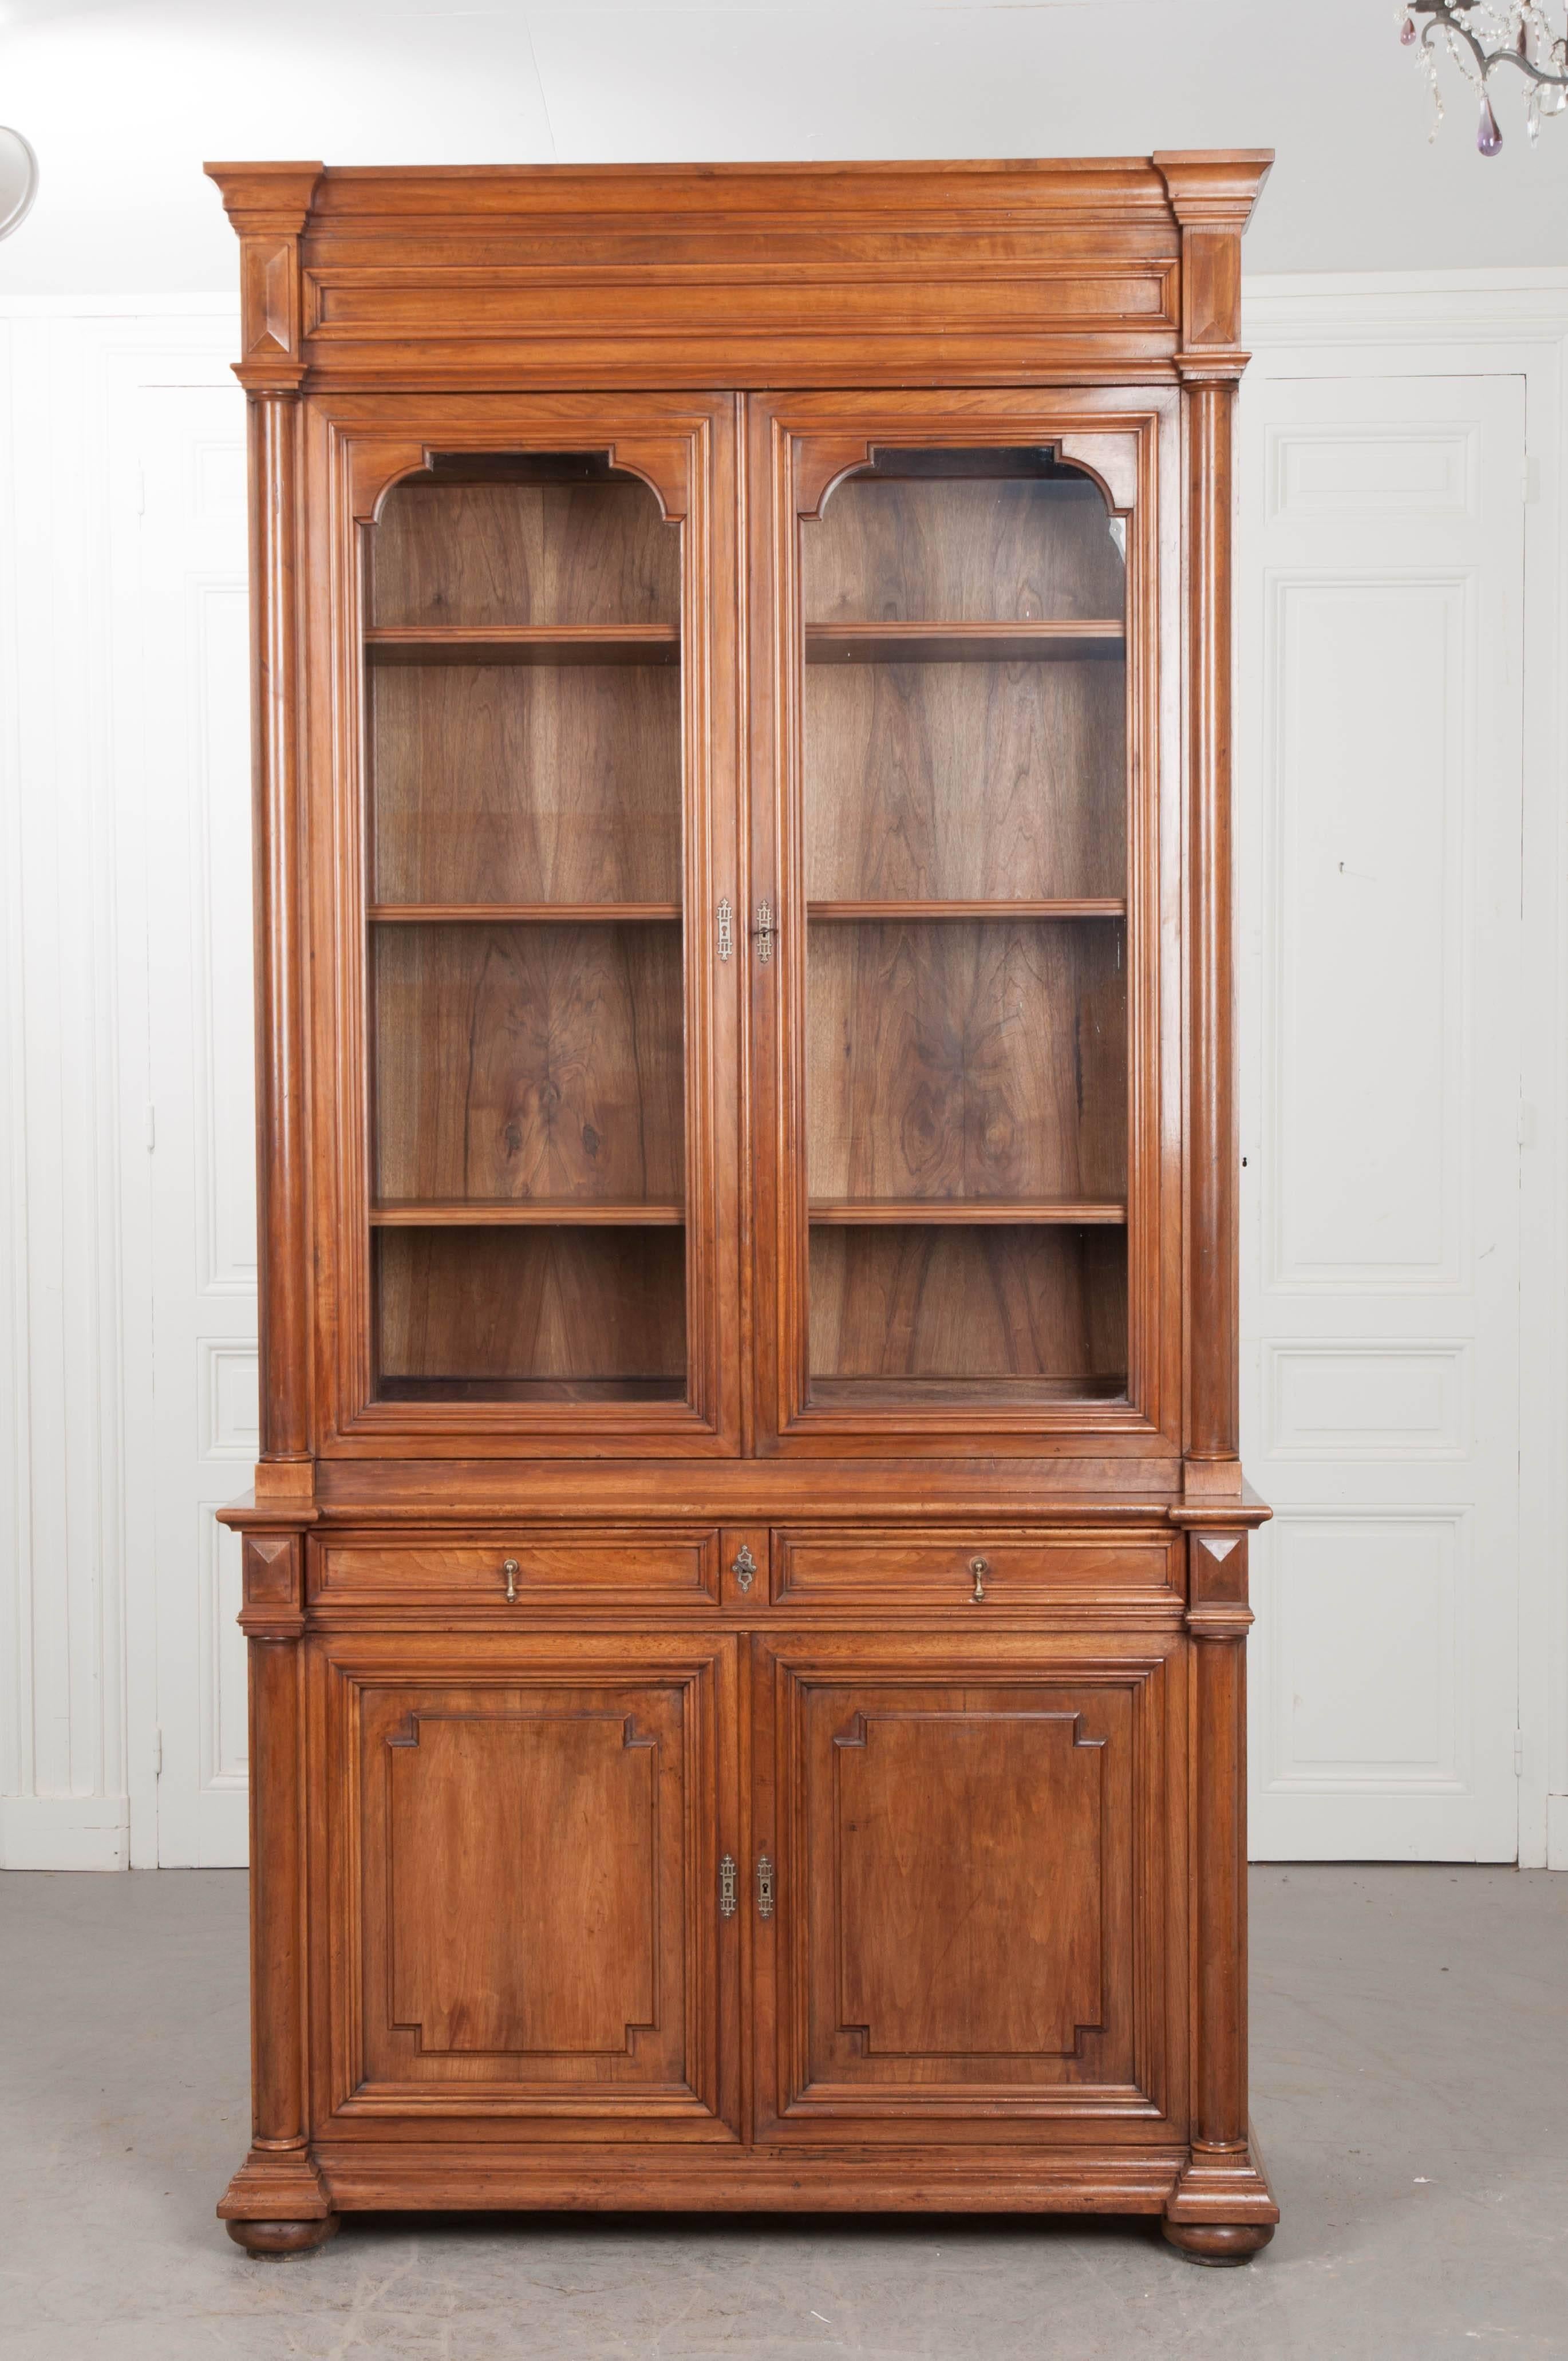 An extraordinary walnut bibliothèque, made in France, circa 1880. This wonderful case piece combines styling elements from both the Louis XIII and Louis Philippe periods. The upper cabinet has two glass-front doors that lock before a shelved